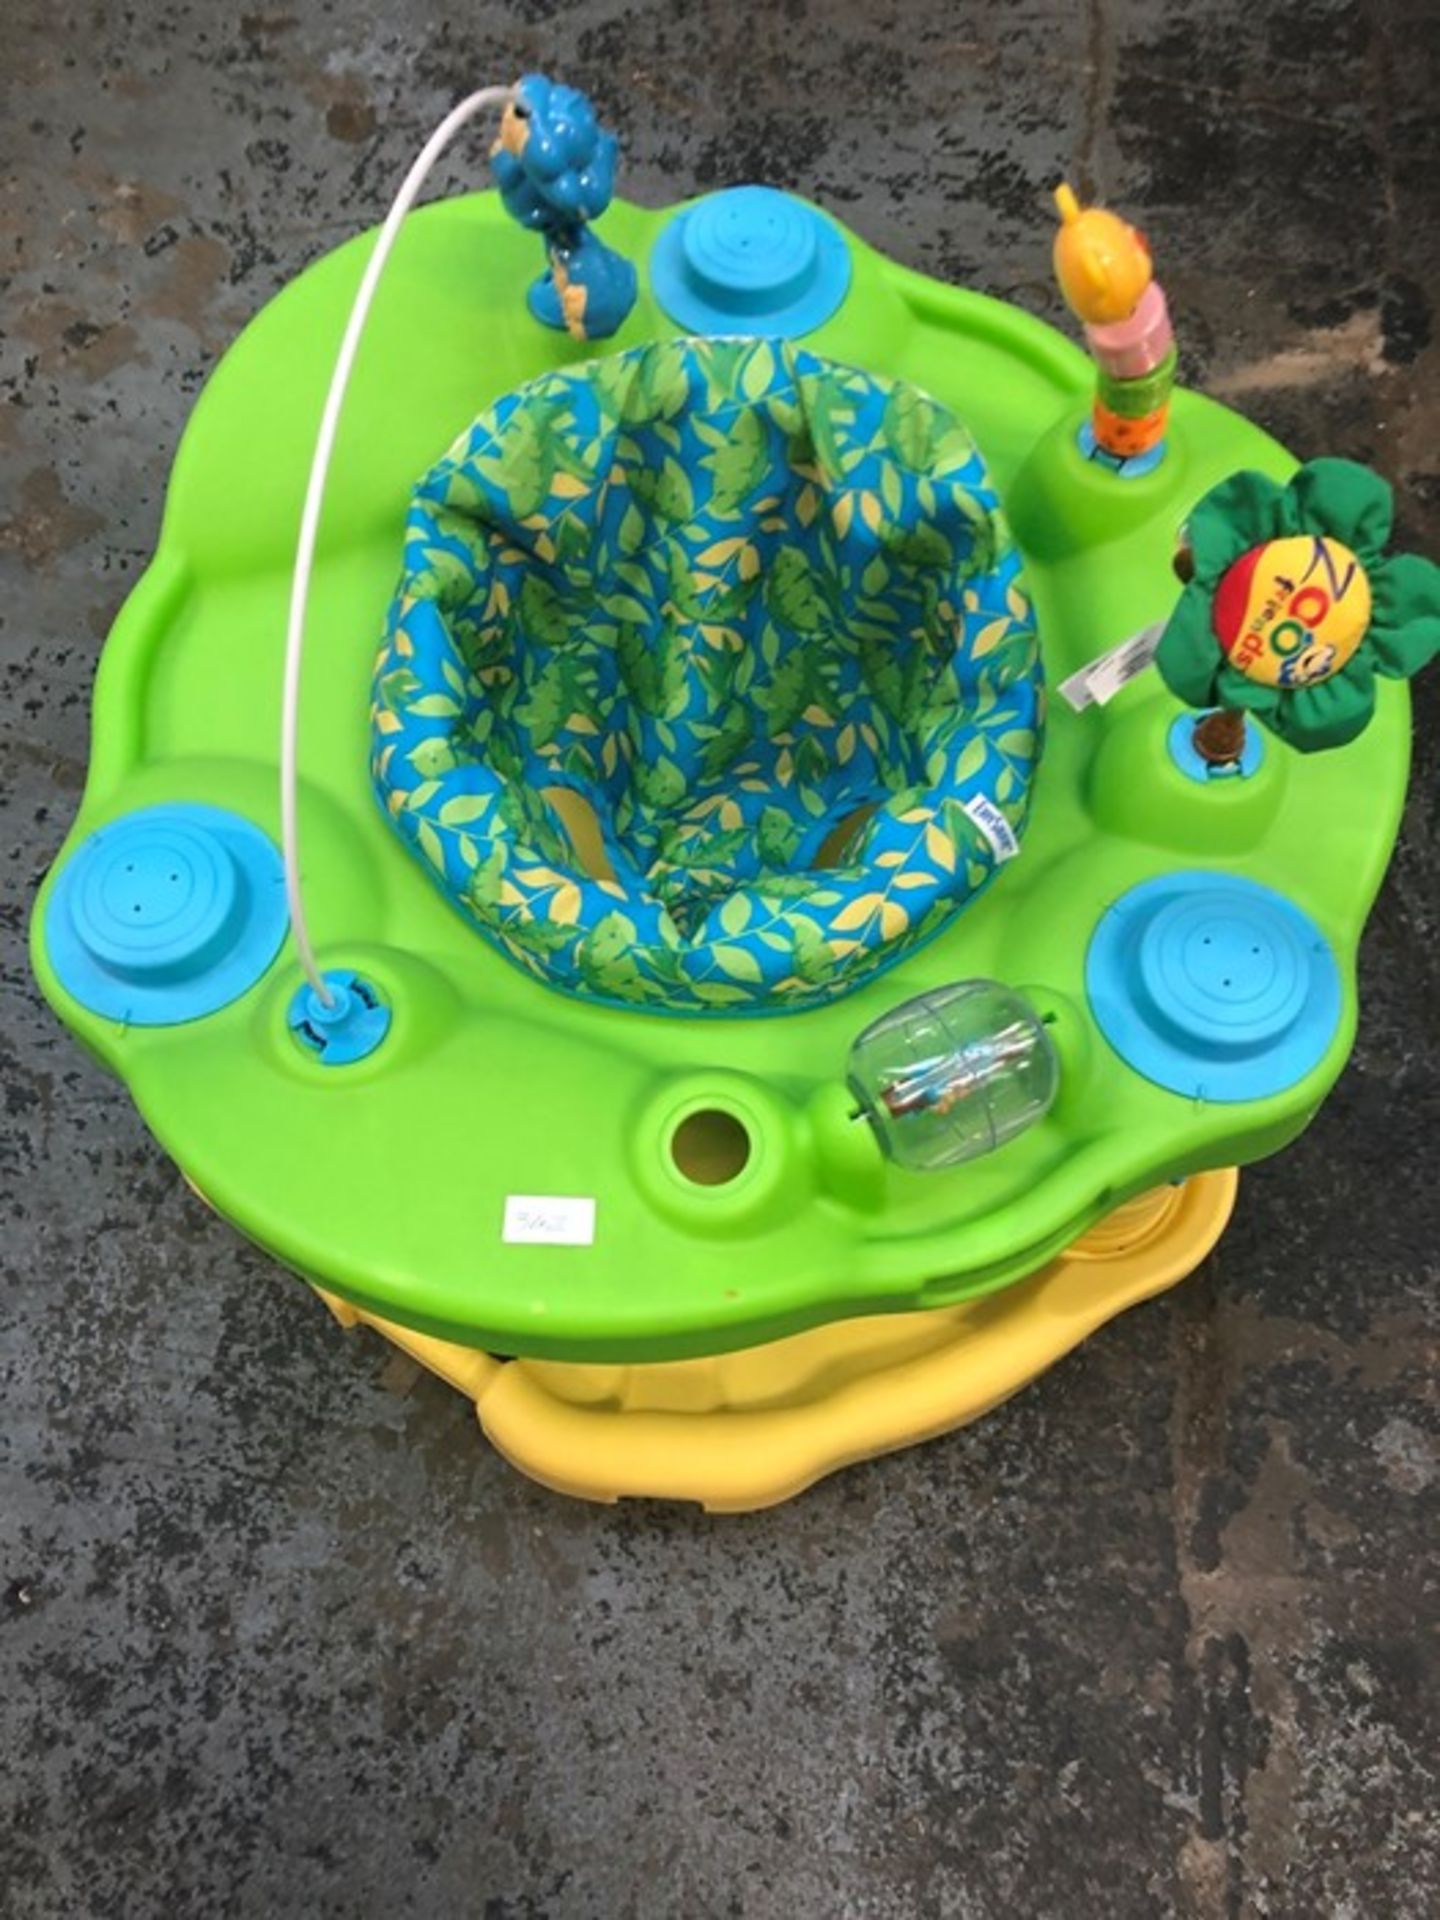 1 EXER SAUCER ZOO FRIENDS ACTIVITY CENTRE / RRP £70.00 (PUBLIC VIEWING AVAILABLE)